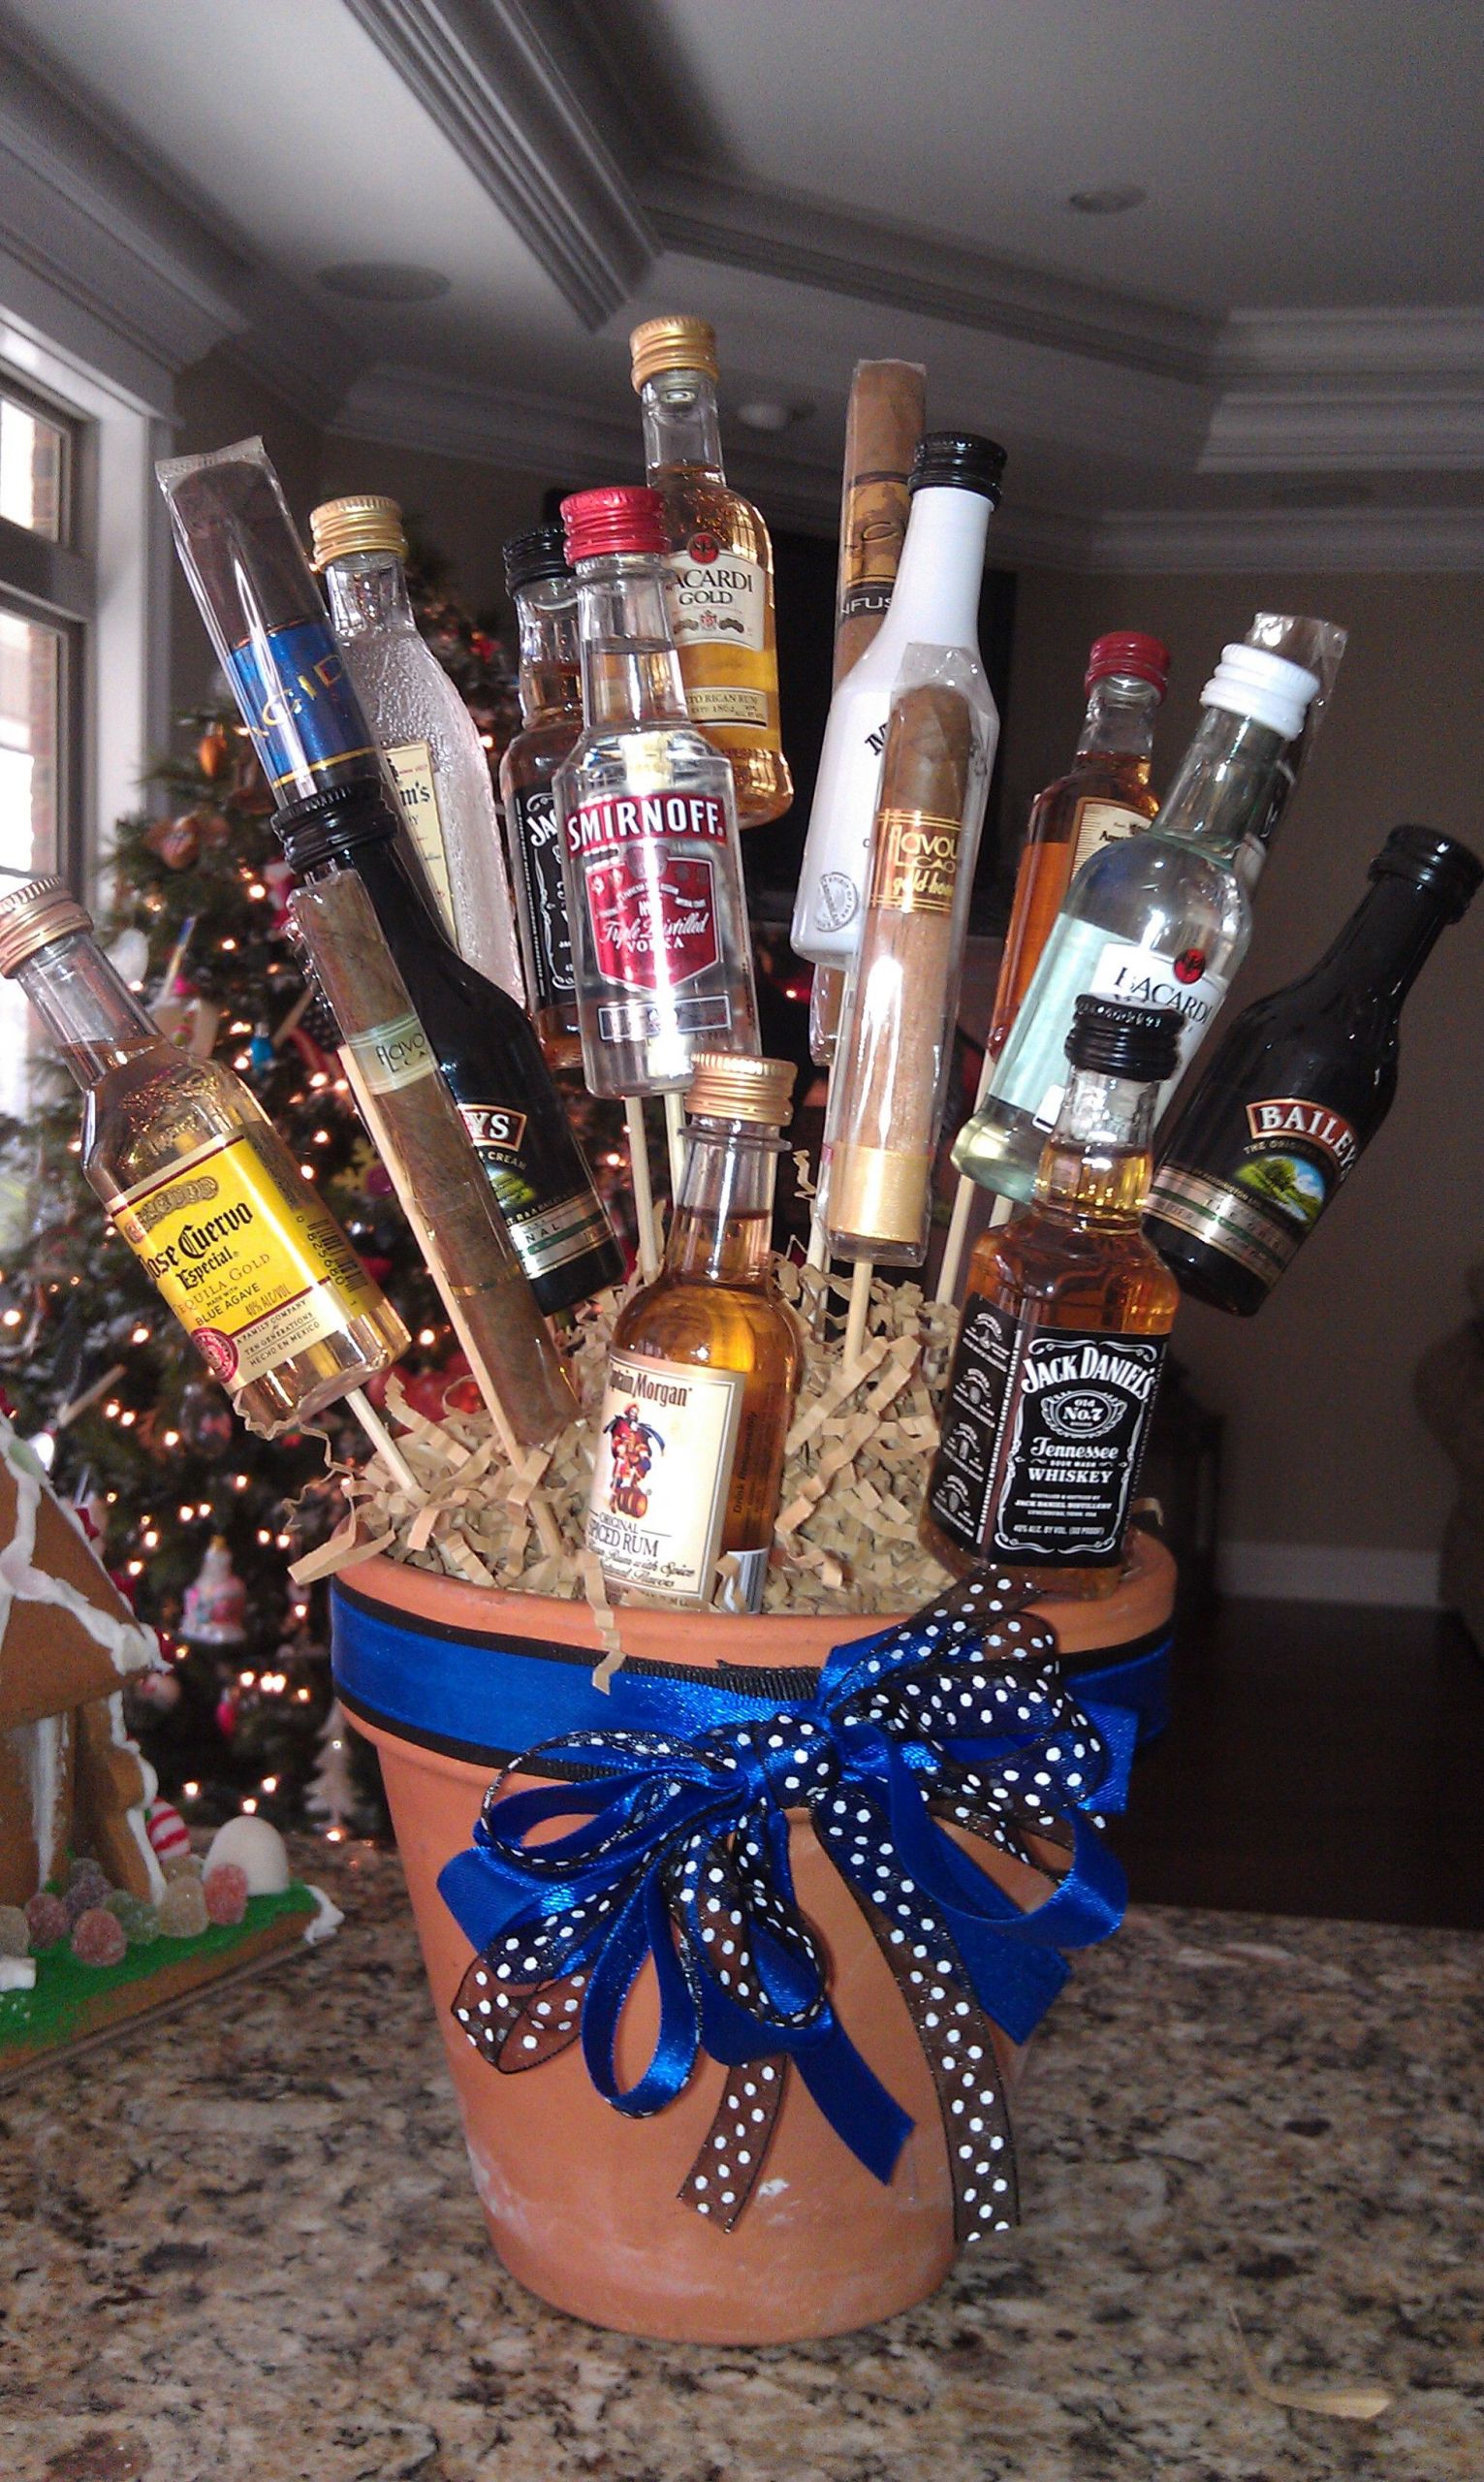 21-ideas-for-17th-birthday-party-ideas-with-alcohol-home-family